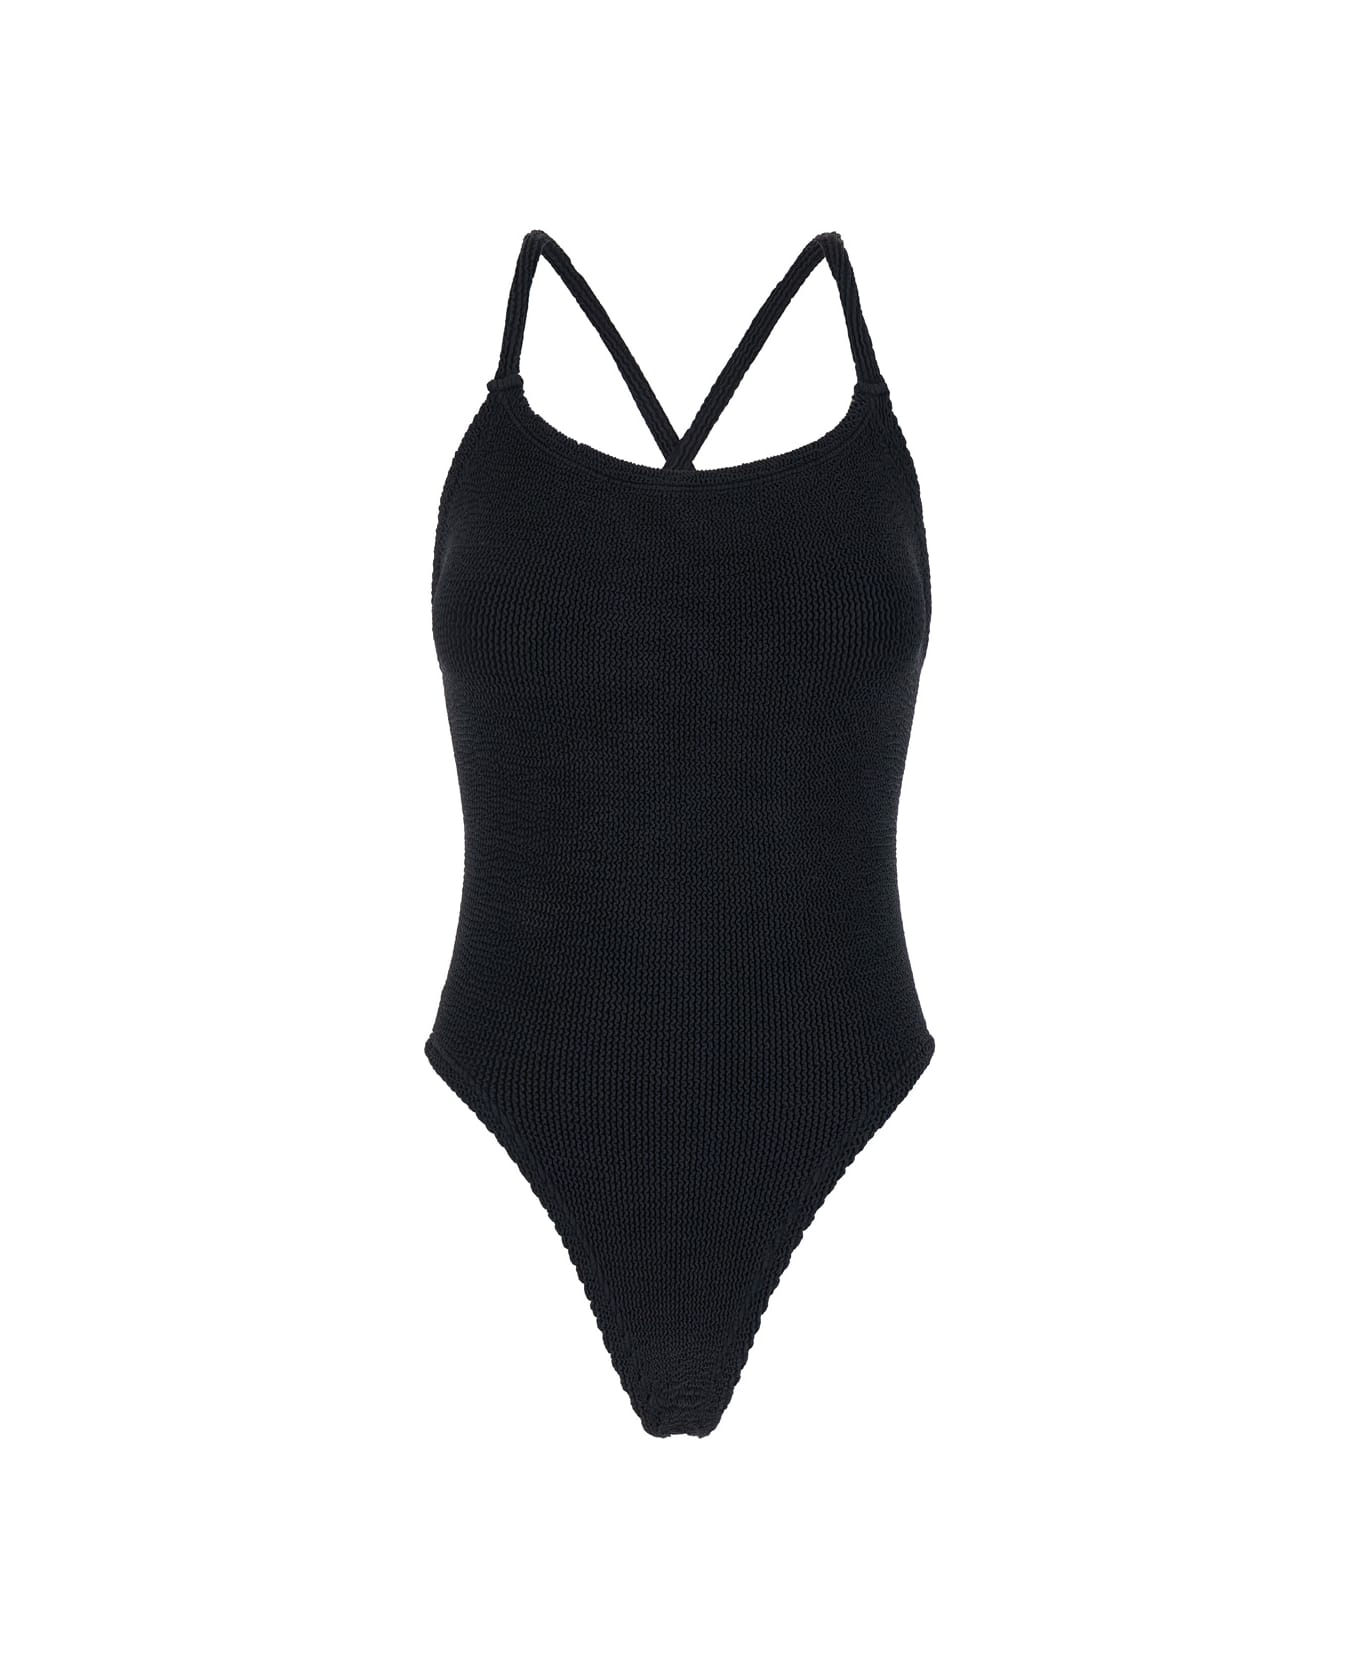 Hunza G 'bette' Black One-piece Swimsuit With Crisscross Straps In Stretch Fabric Woman - Black